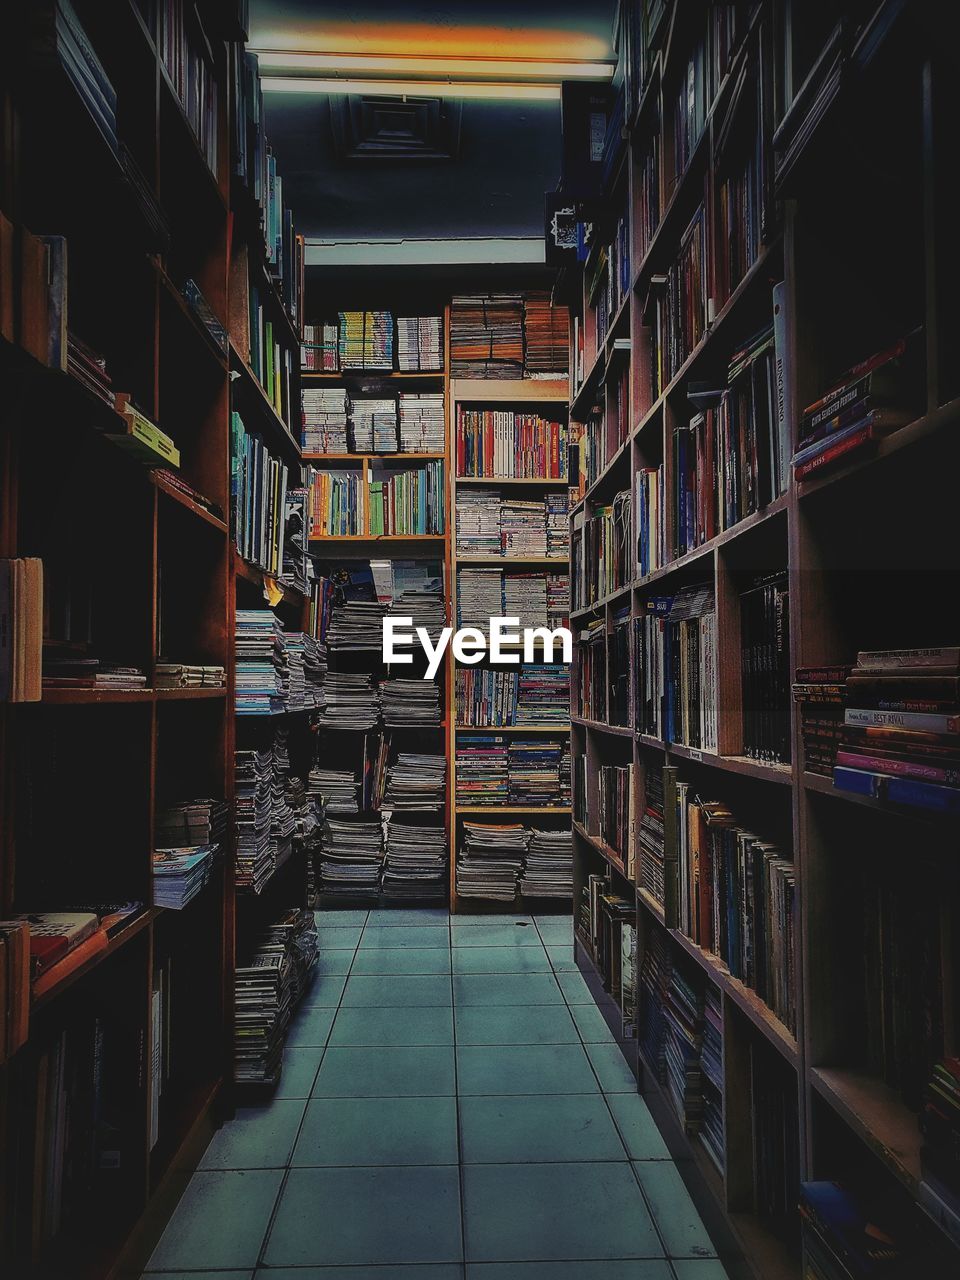 shelf, book, publication, bookshelf, education, library, learning, indoors, large group of objects, bookcase, building, public library, research, in a row, literature, archive, architecture, abundance, no people, university, order, school, wisdom, intelligence